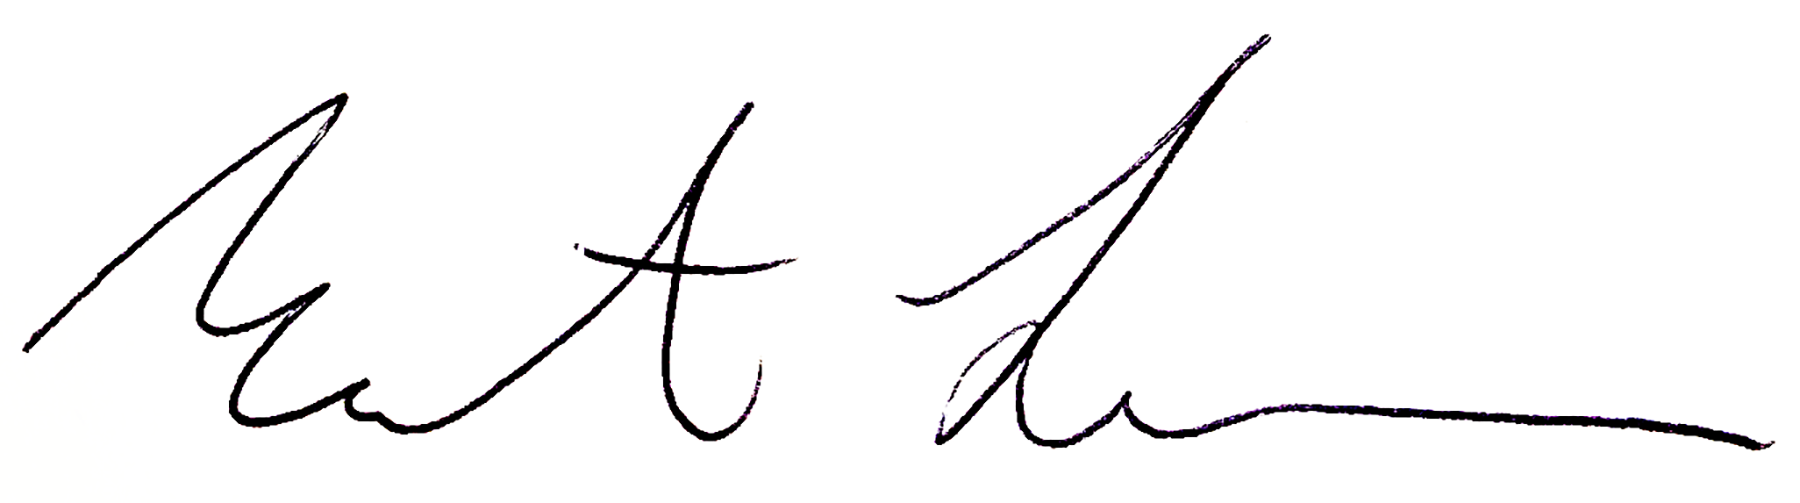 Signature that reads Robert Lennon, black ink on white background